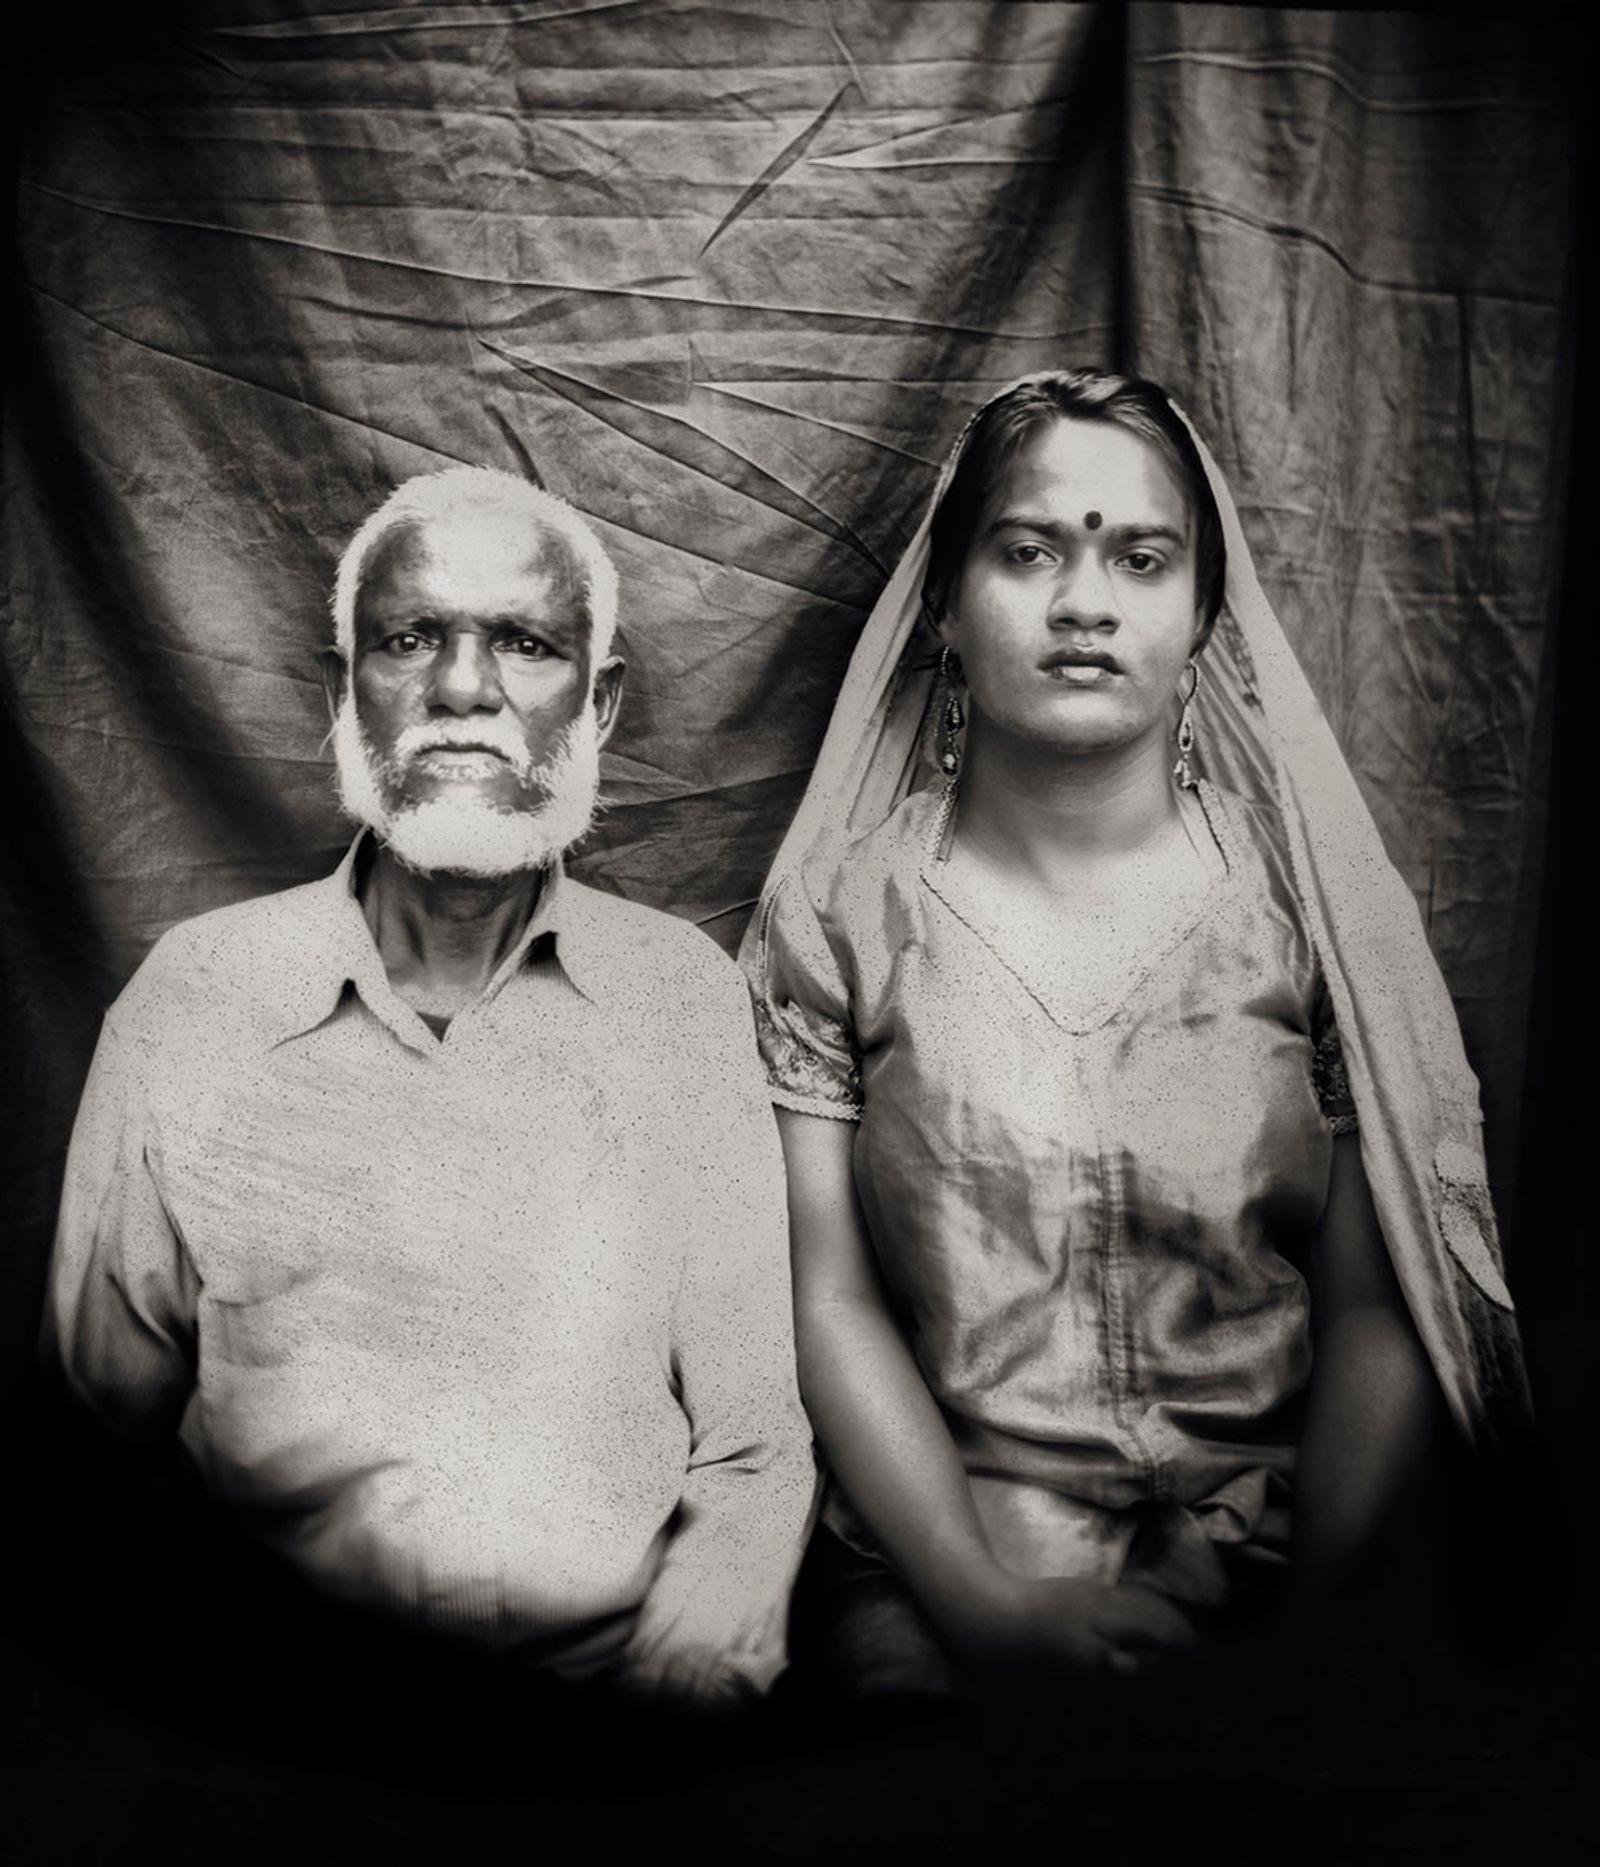 © Shahria Sharmin - Image from the Call Me Heena photography project